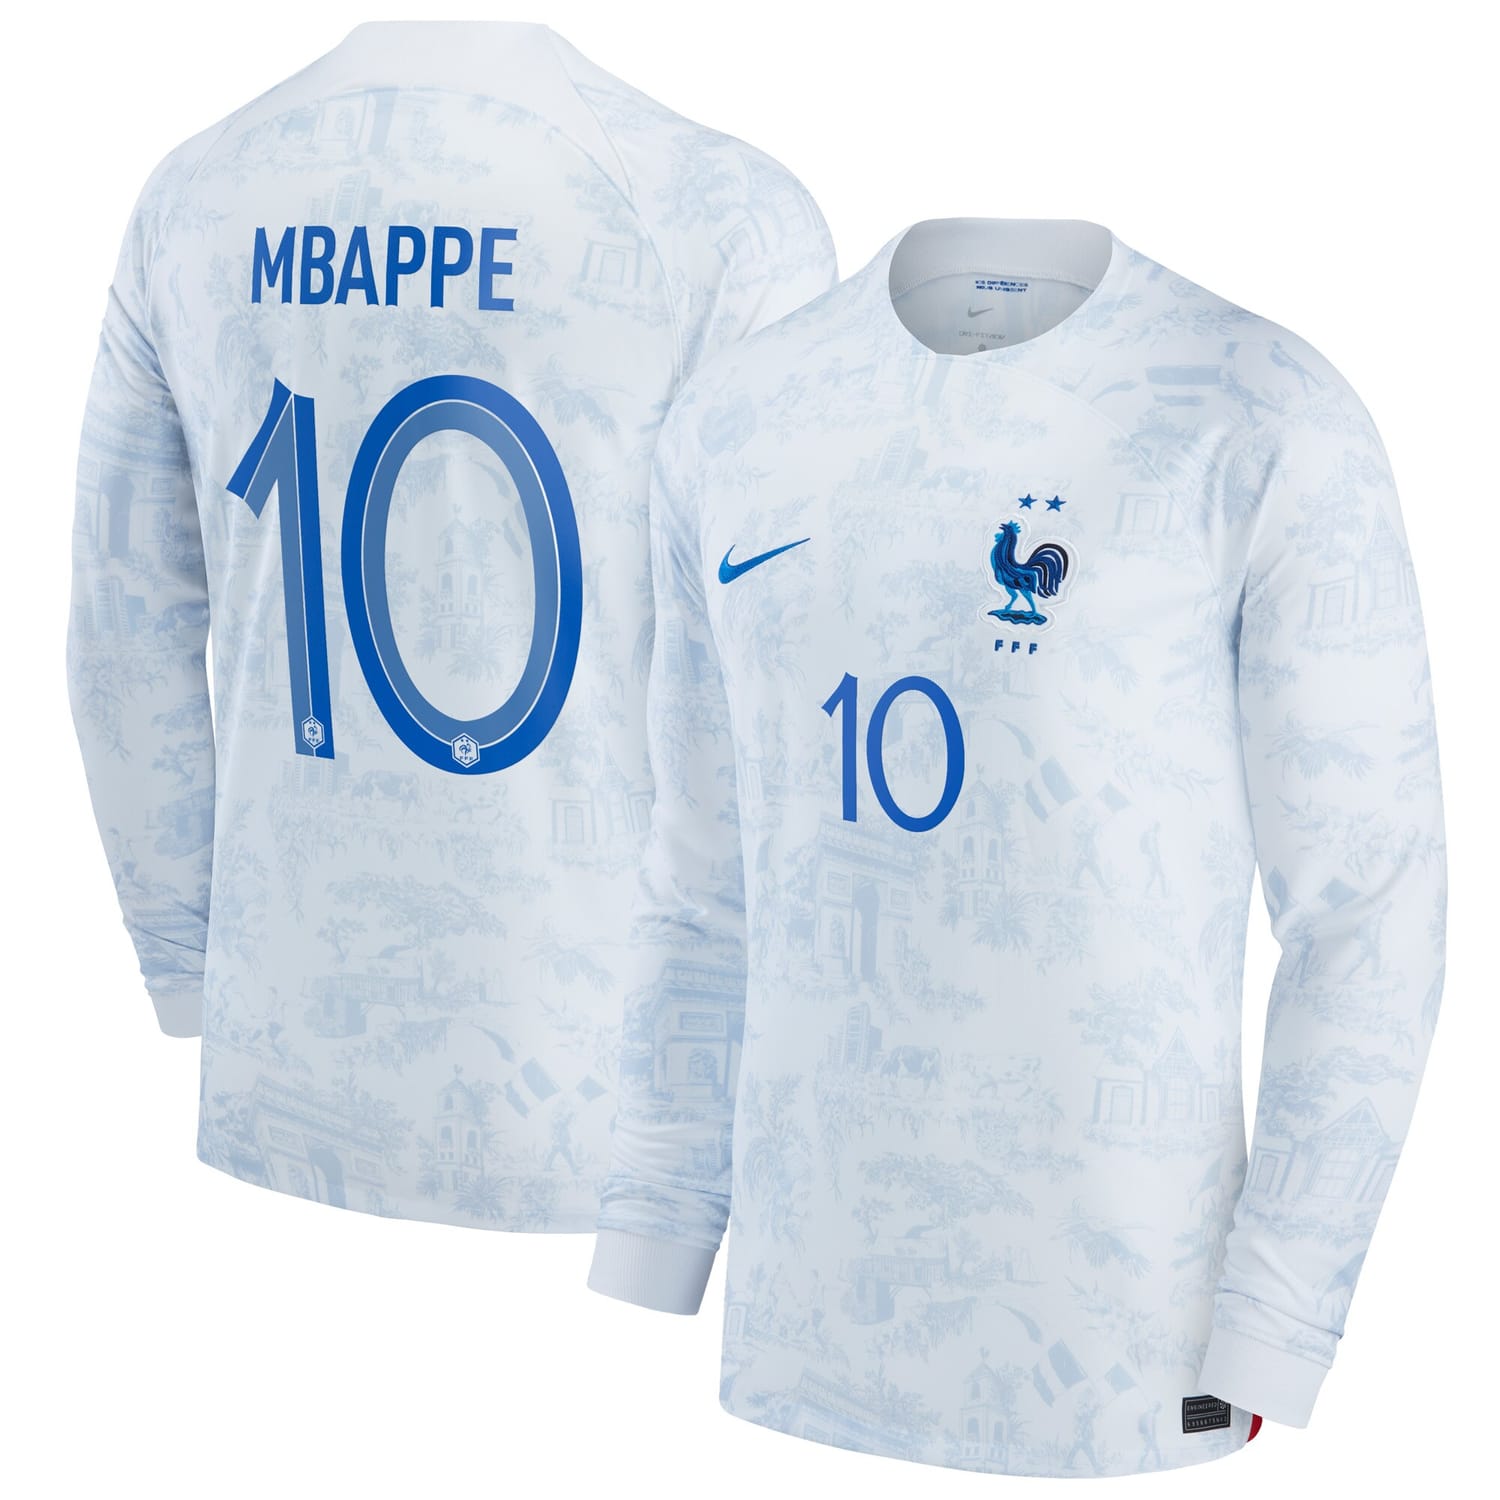 France National Team Away Jersey Shirt White 2022-23 player Kylian Mbappe printing for Men